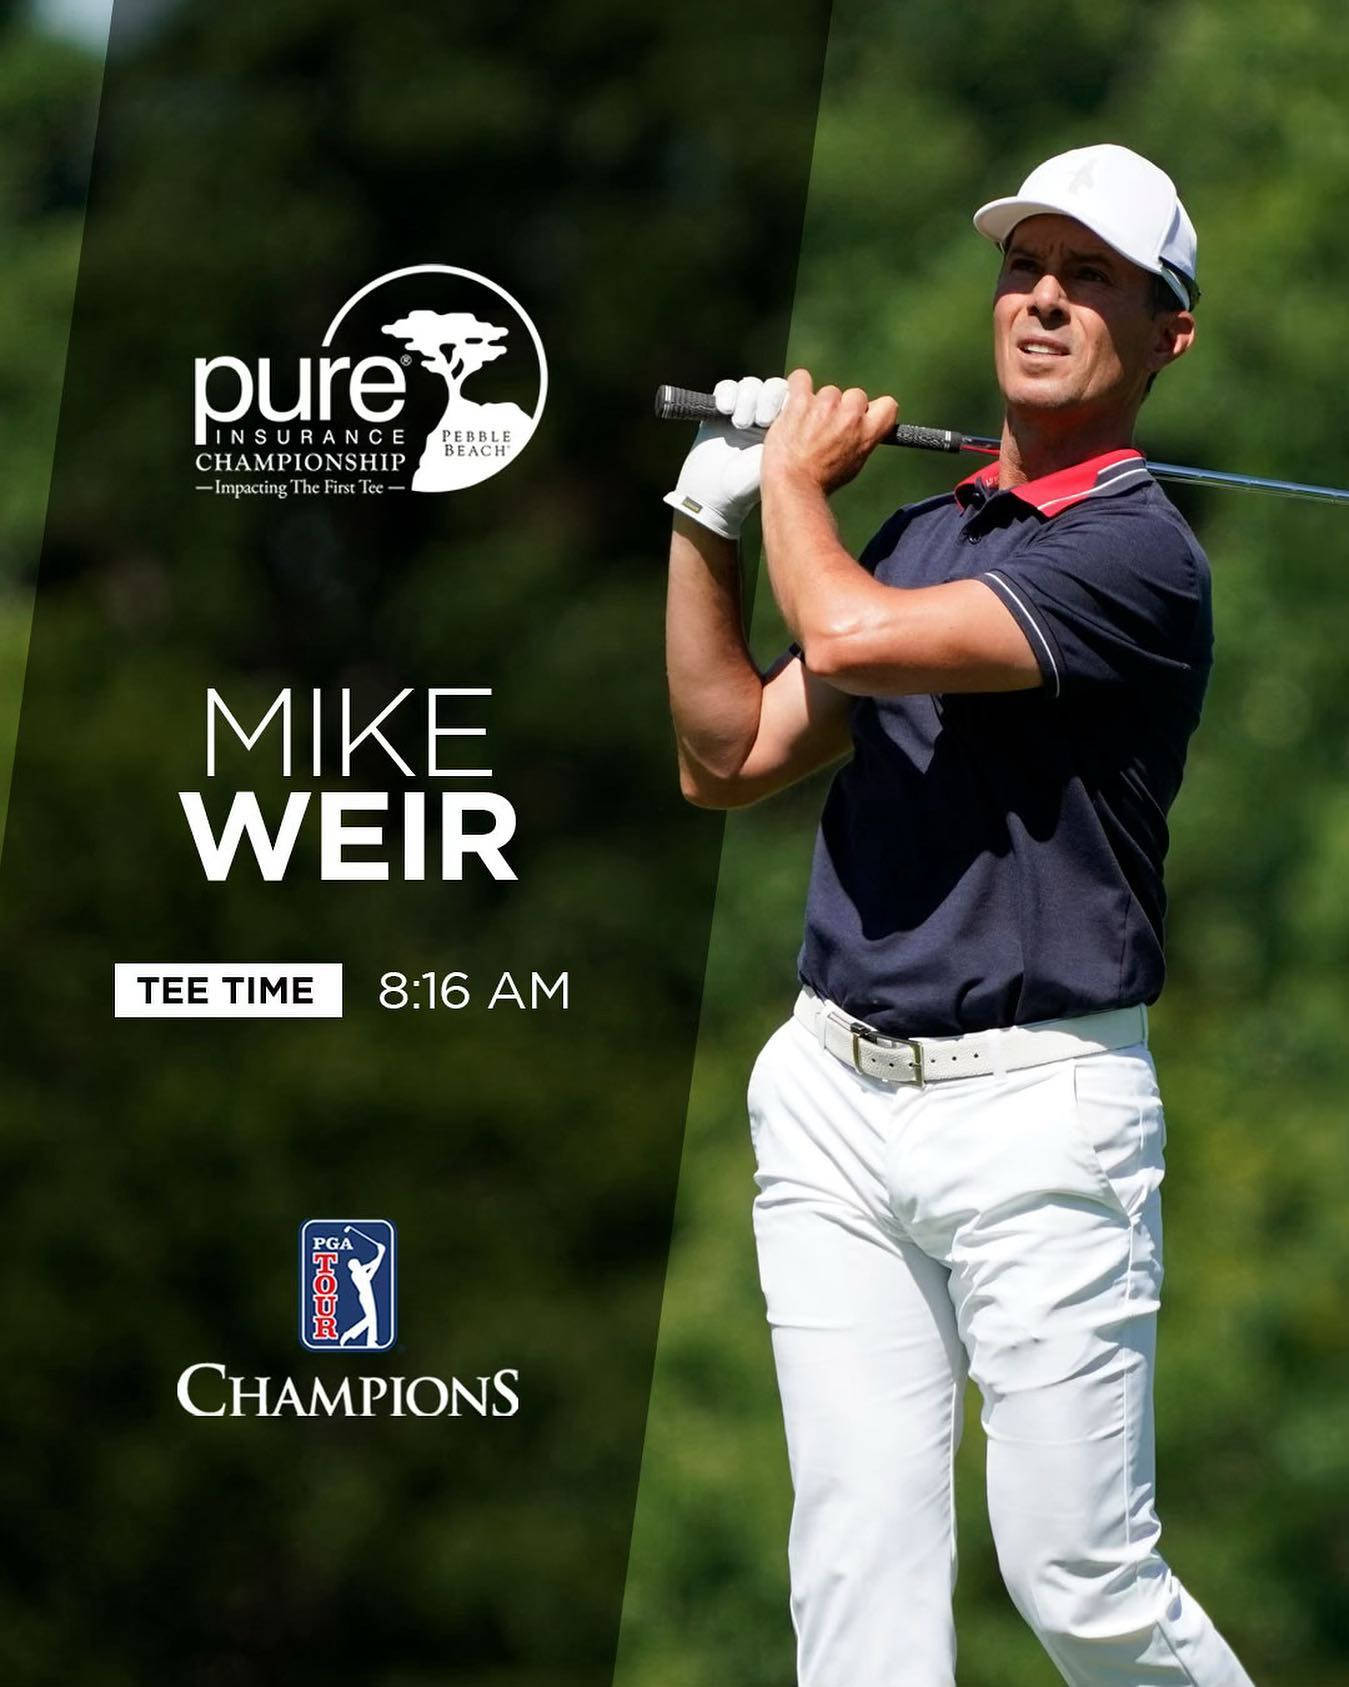 Celebrated golfer Mike Weir in action. Wallpaper